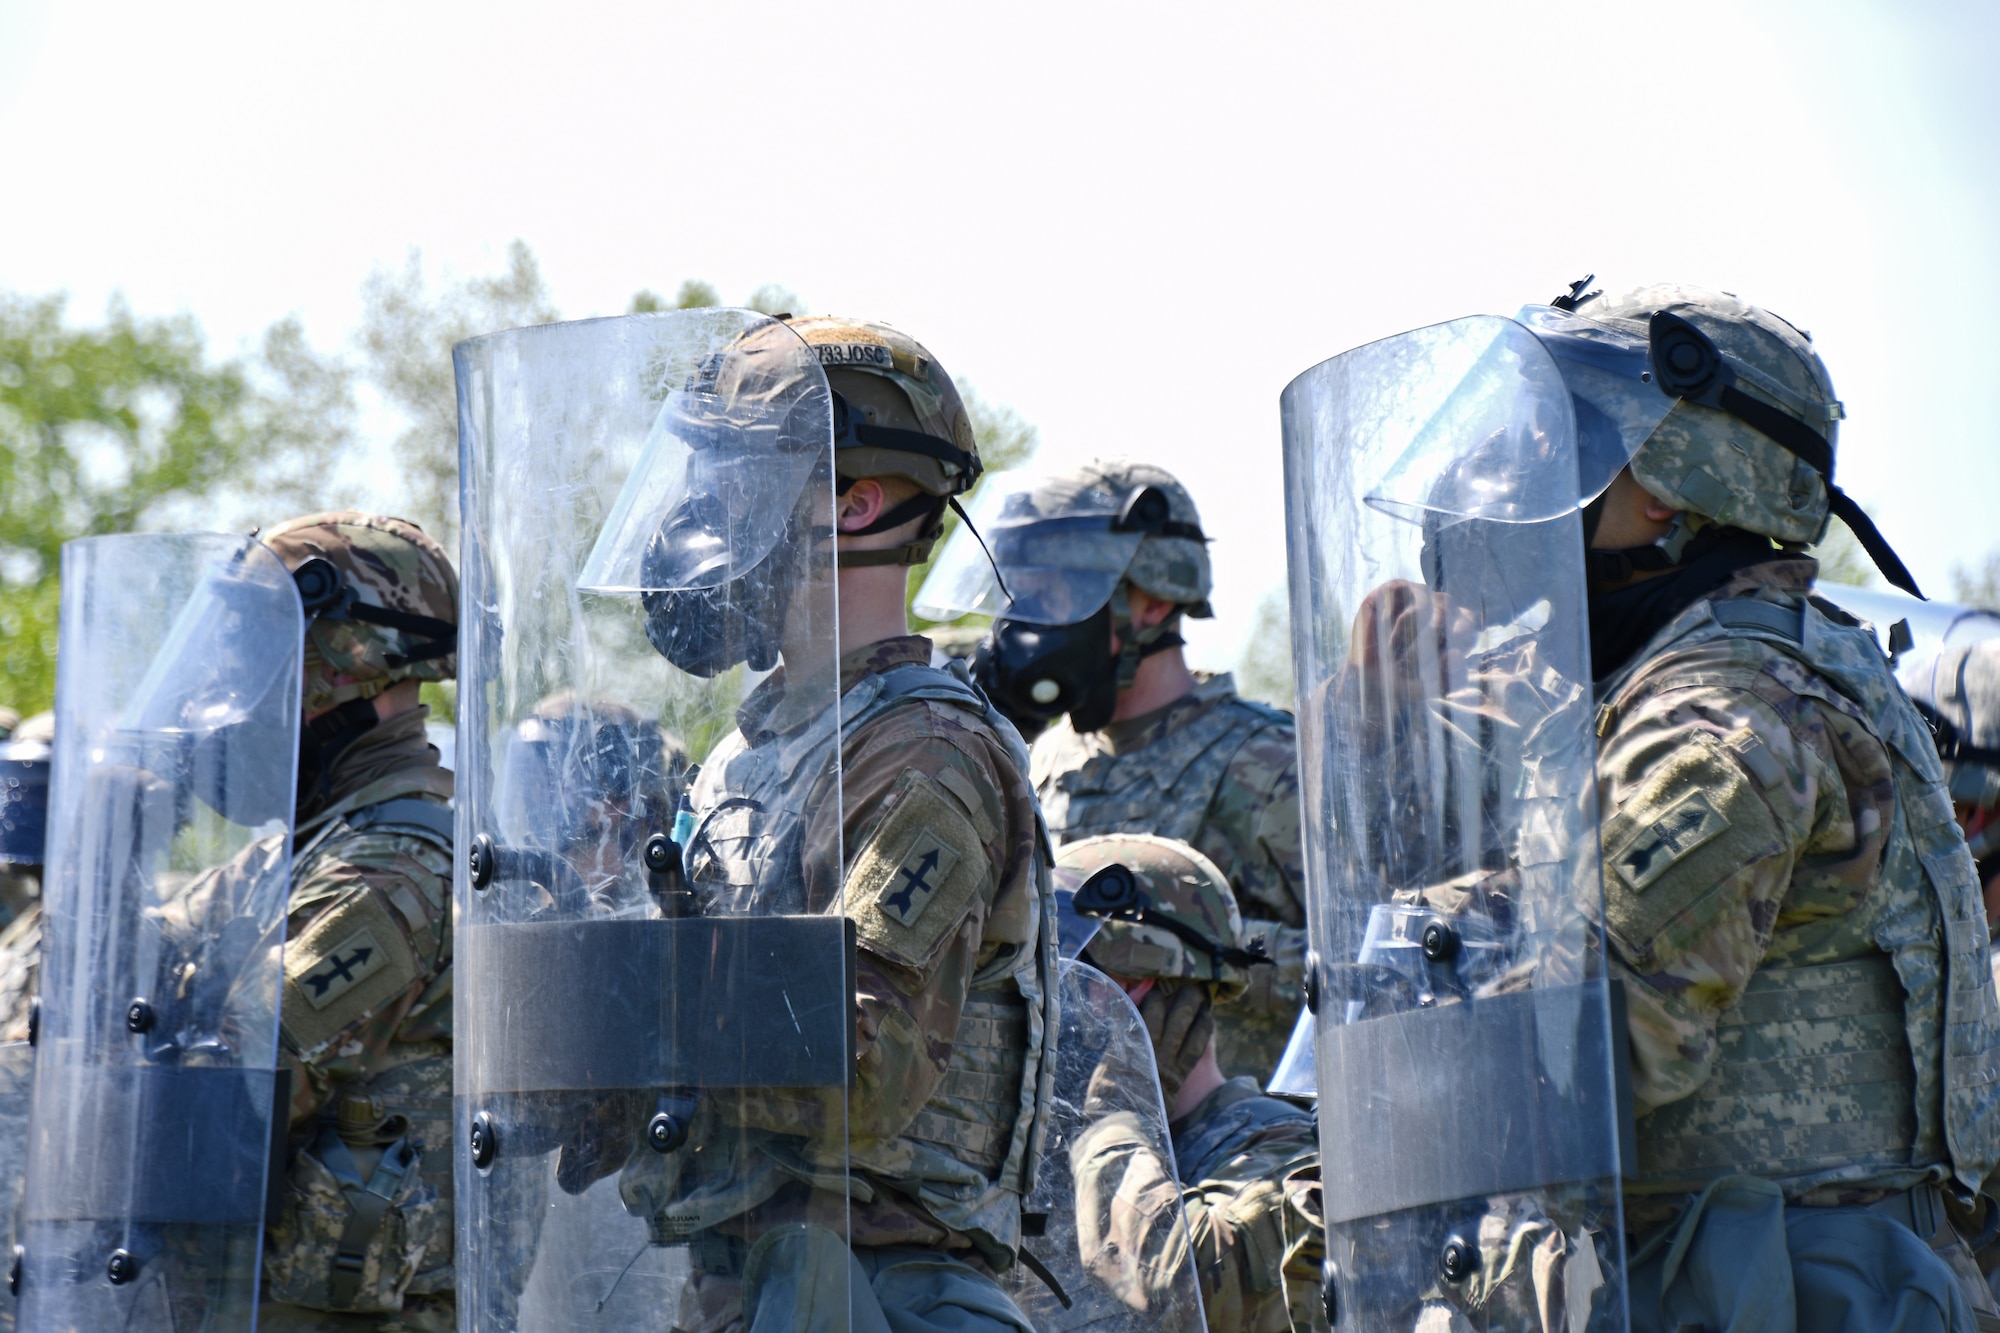 U.S. Army and Air National Guardsmen participate in a Civil Disturbance Unit training event with Capitol Police at the Park Police training grounds in Washington, D.C., April 27, 2021. Since January, Army and Air National Guard units from around the country have provided ongoing security, communication, medical, evacuation, logistical and safety support to capital civil authorities. (U.S. Air National Guard photo by Staff Sgt. Hanna Smith)